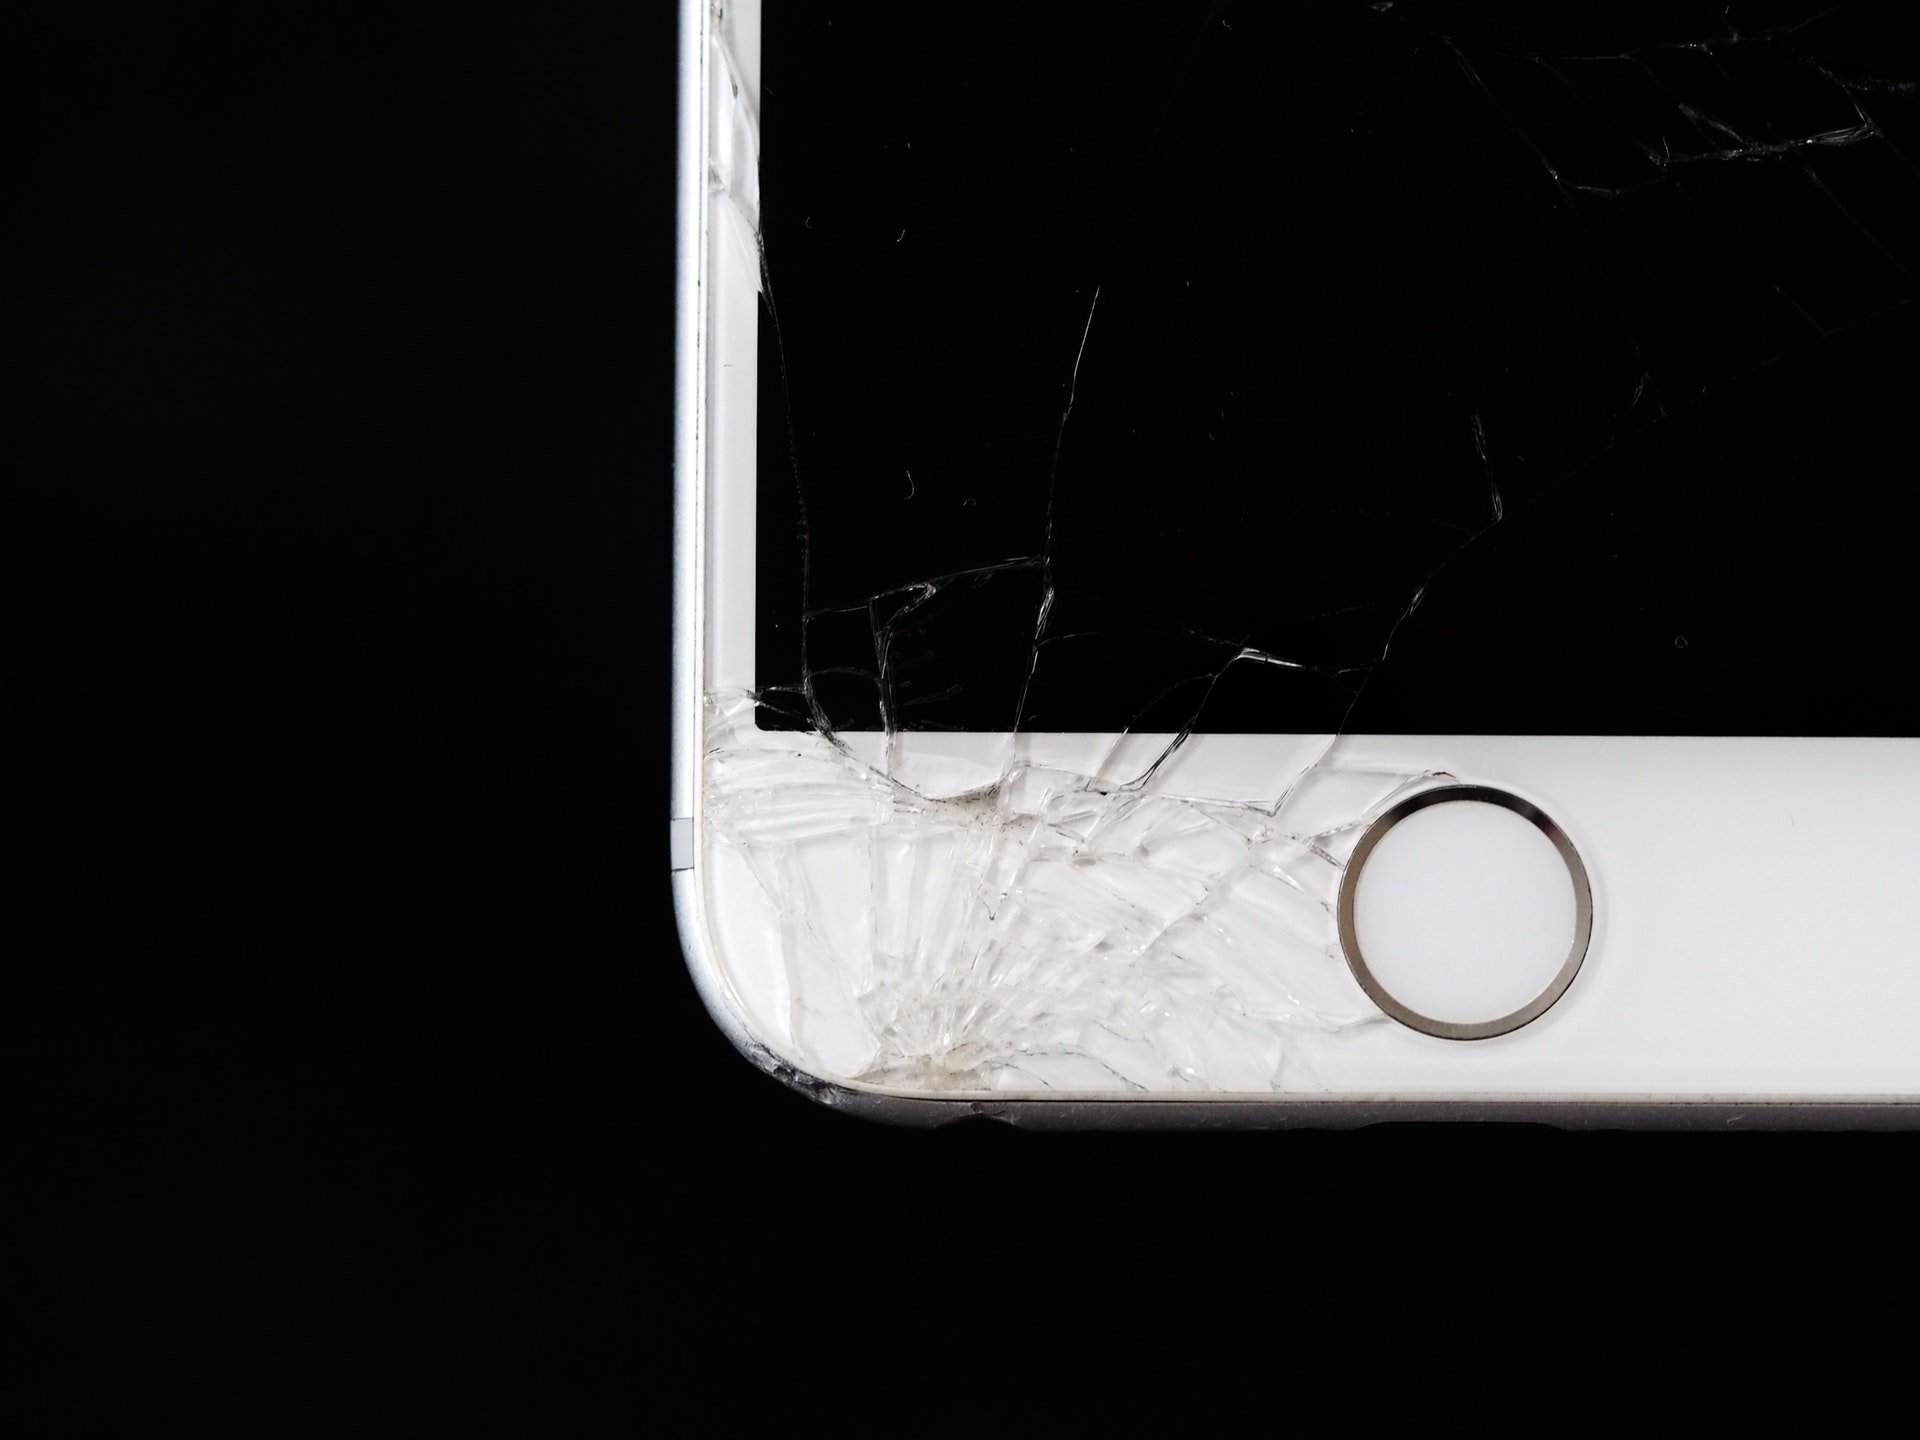 cracked screen of a iphone